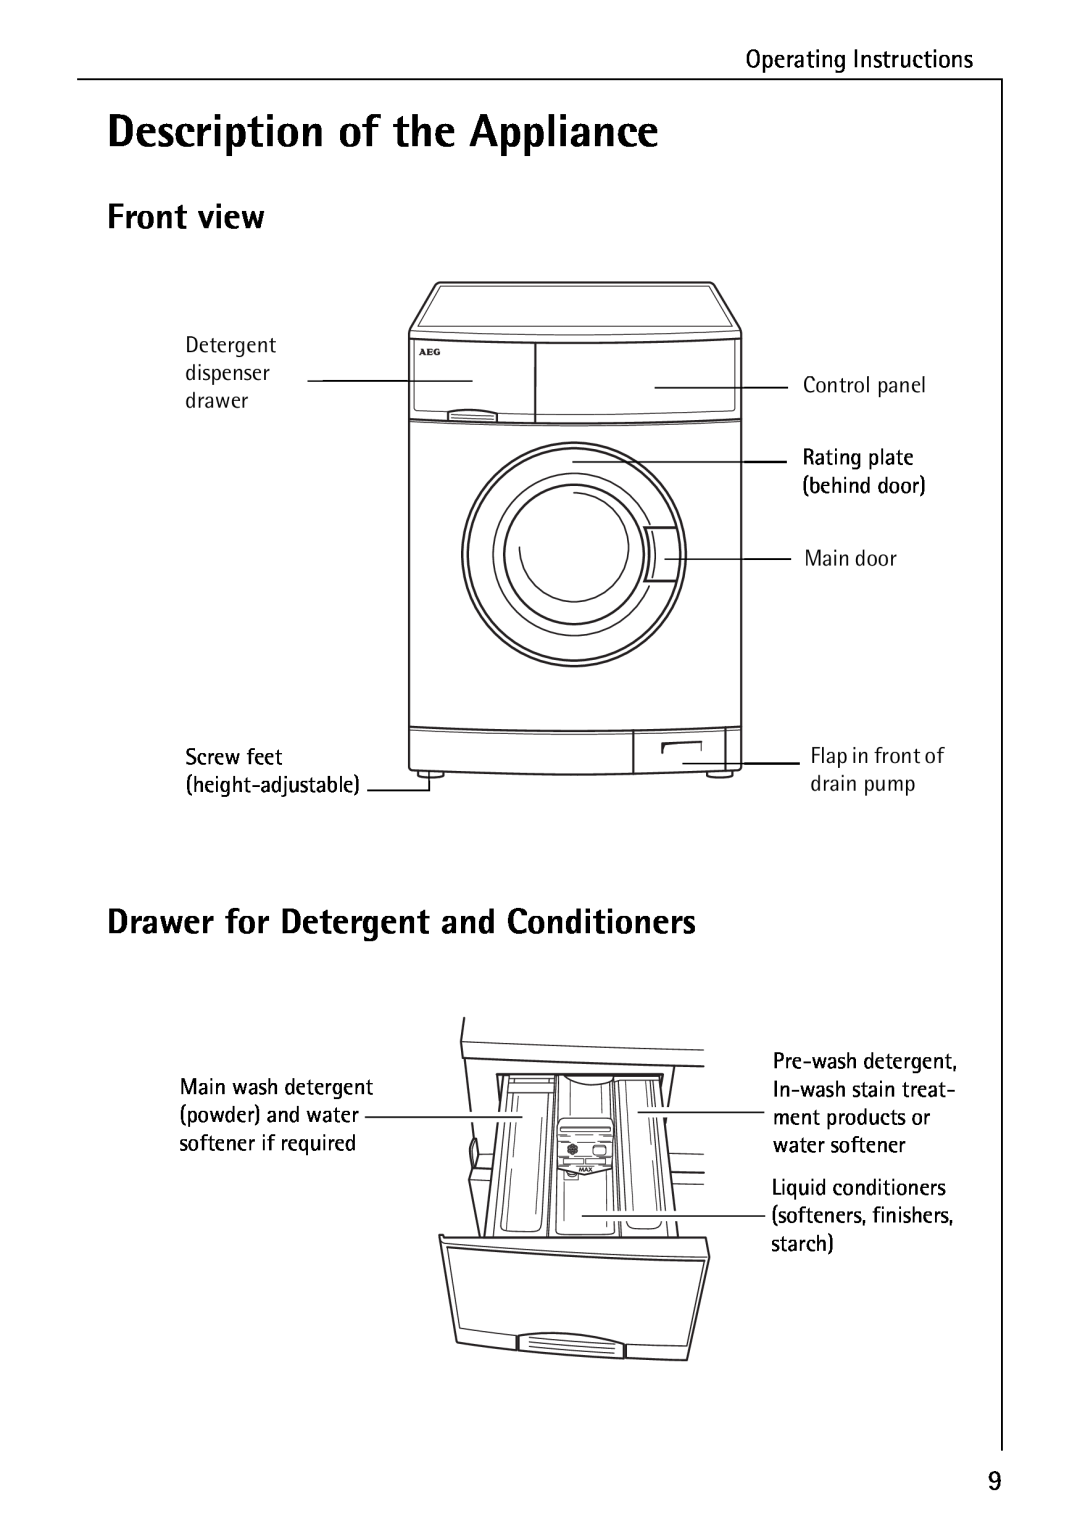 Electrolux LAVAMAT W 1259 manual Description of the Appliance, Front view, Drawer for Detergent and Conditioners 